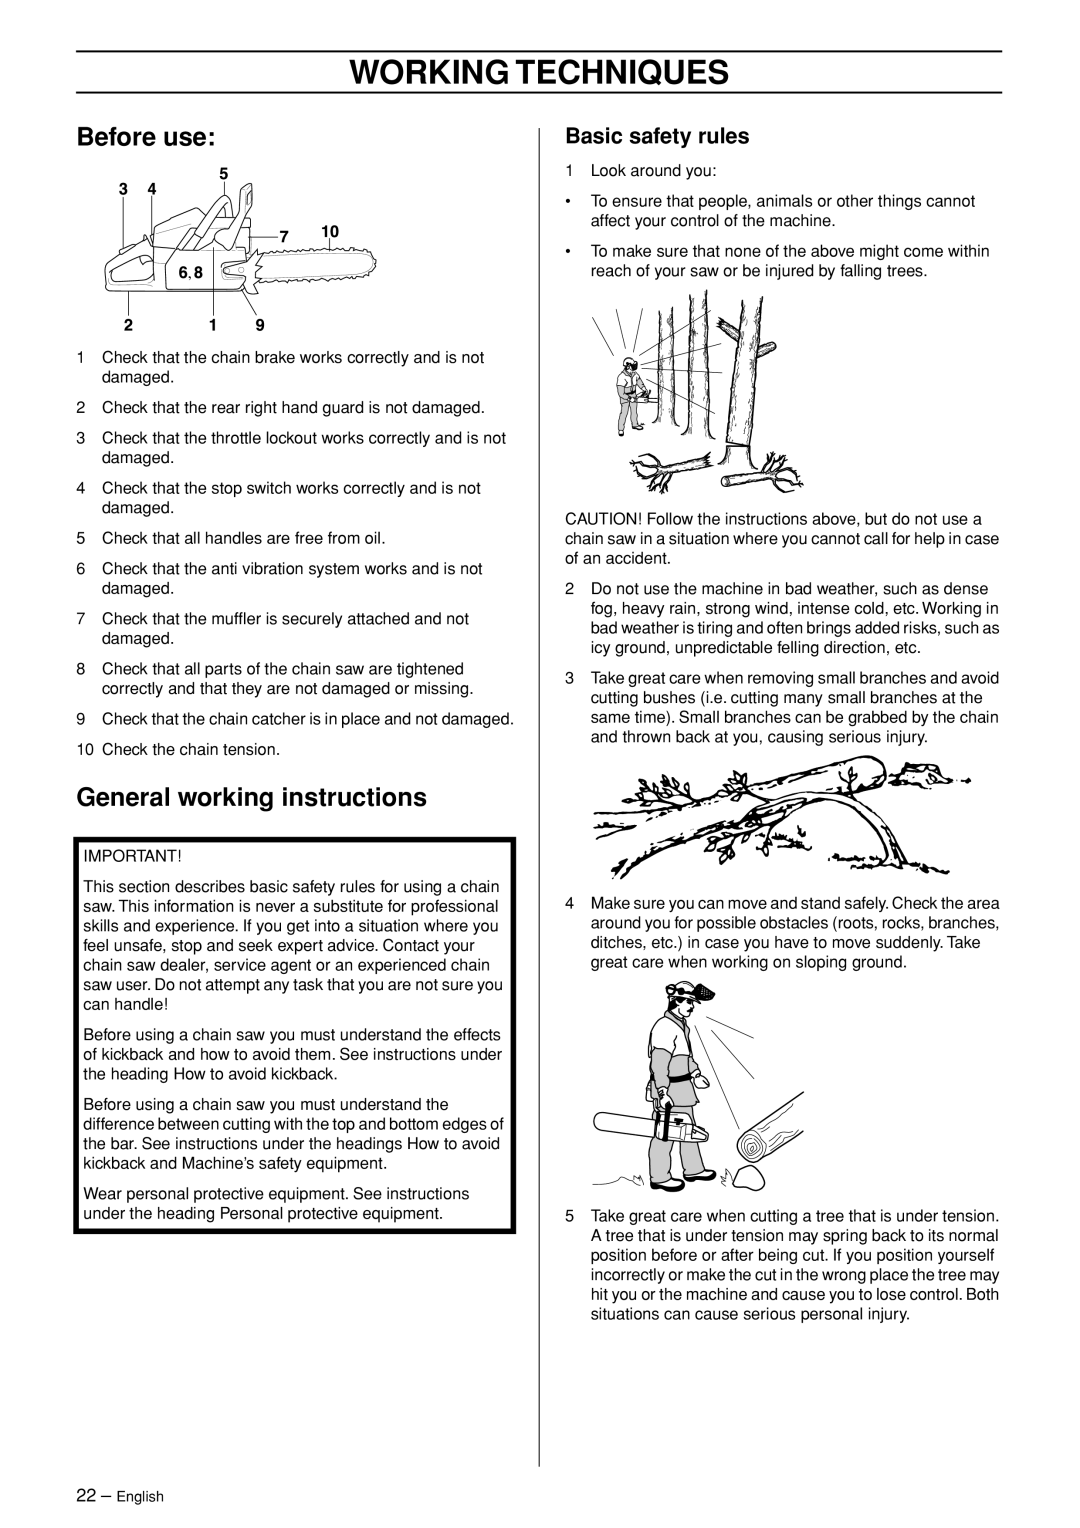 Jonsered CS 2255 manual Working Techniques, Before use, General working instructions, Basic safety rules 